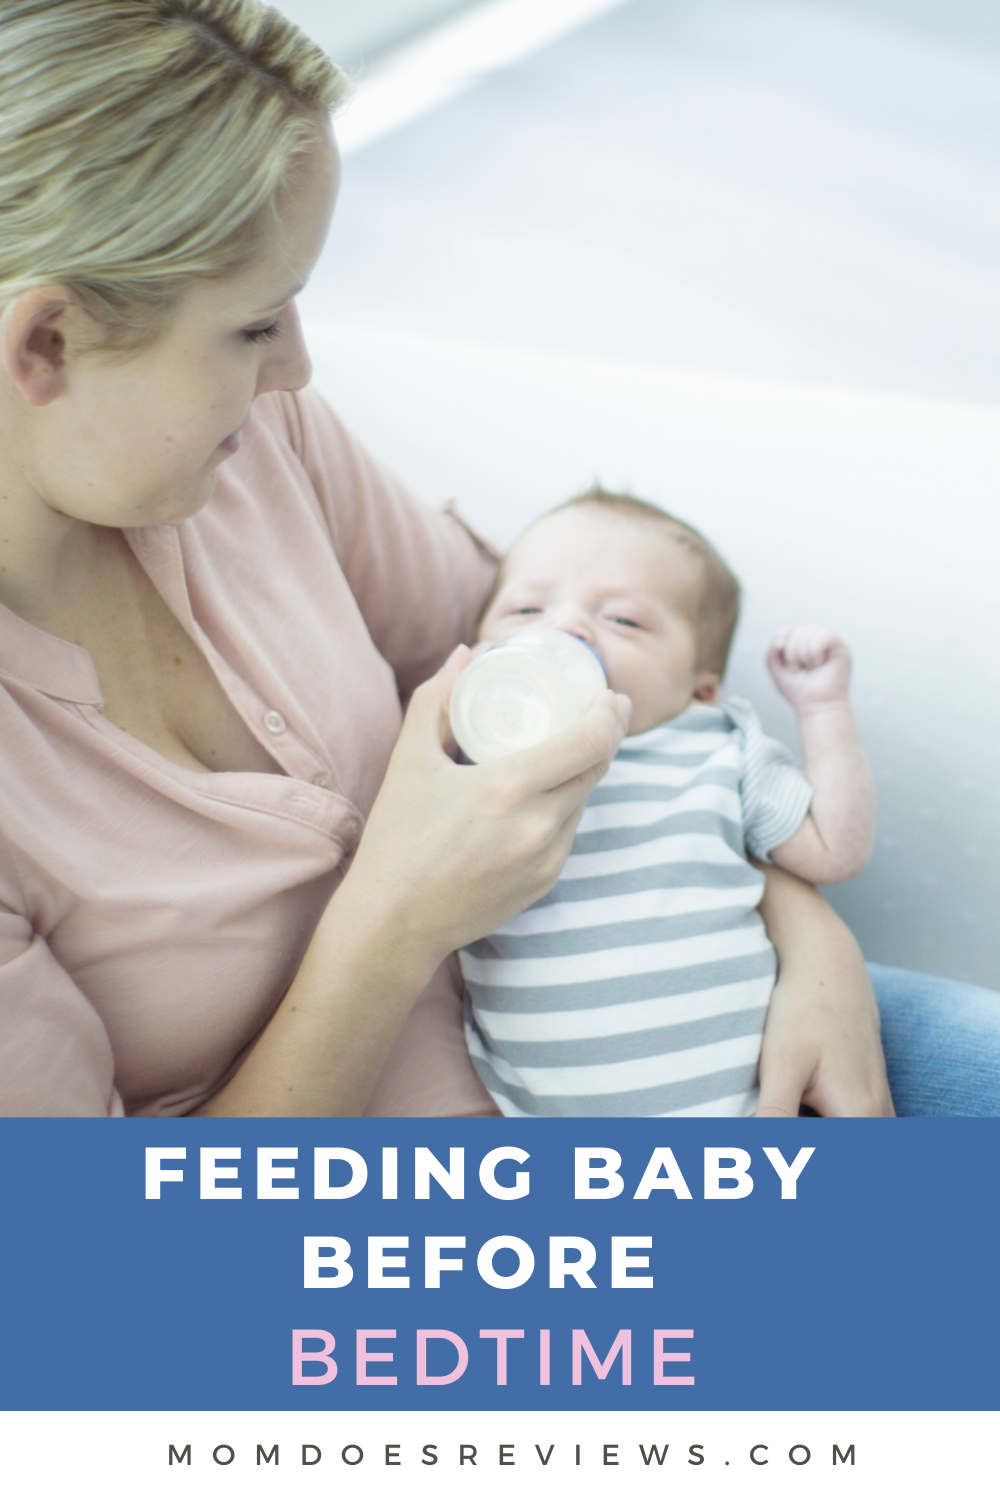 Feeding Baby Before Bedtime: 5 Facts Moms Should Know